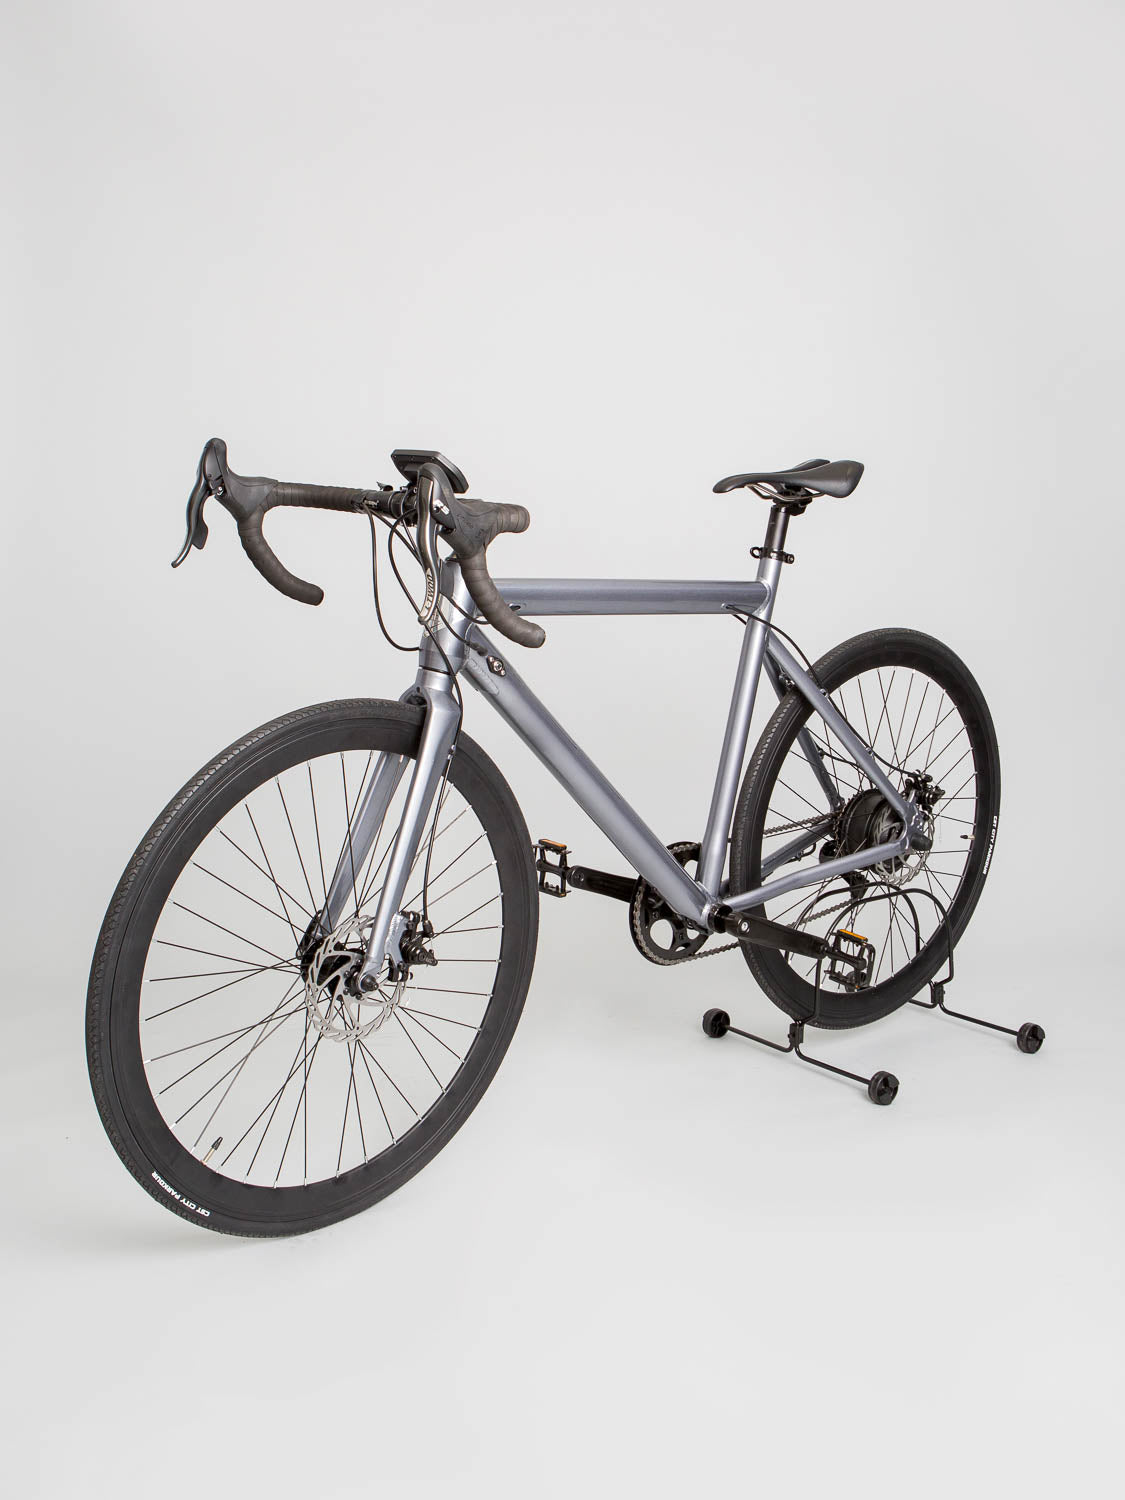 JANOBIKE - ELECTRON XR1 - ON SALE - IN STORE PICK-UP ONLY